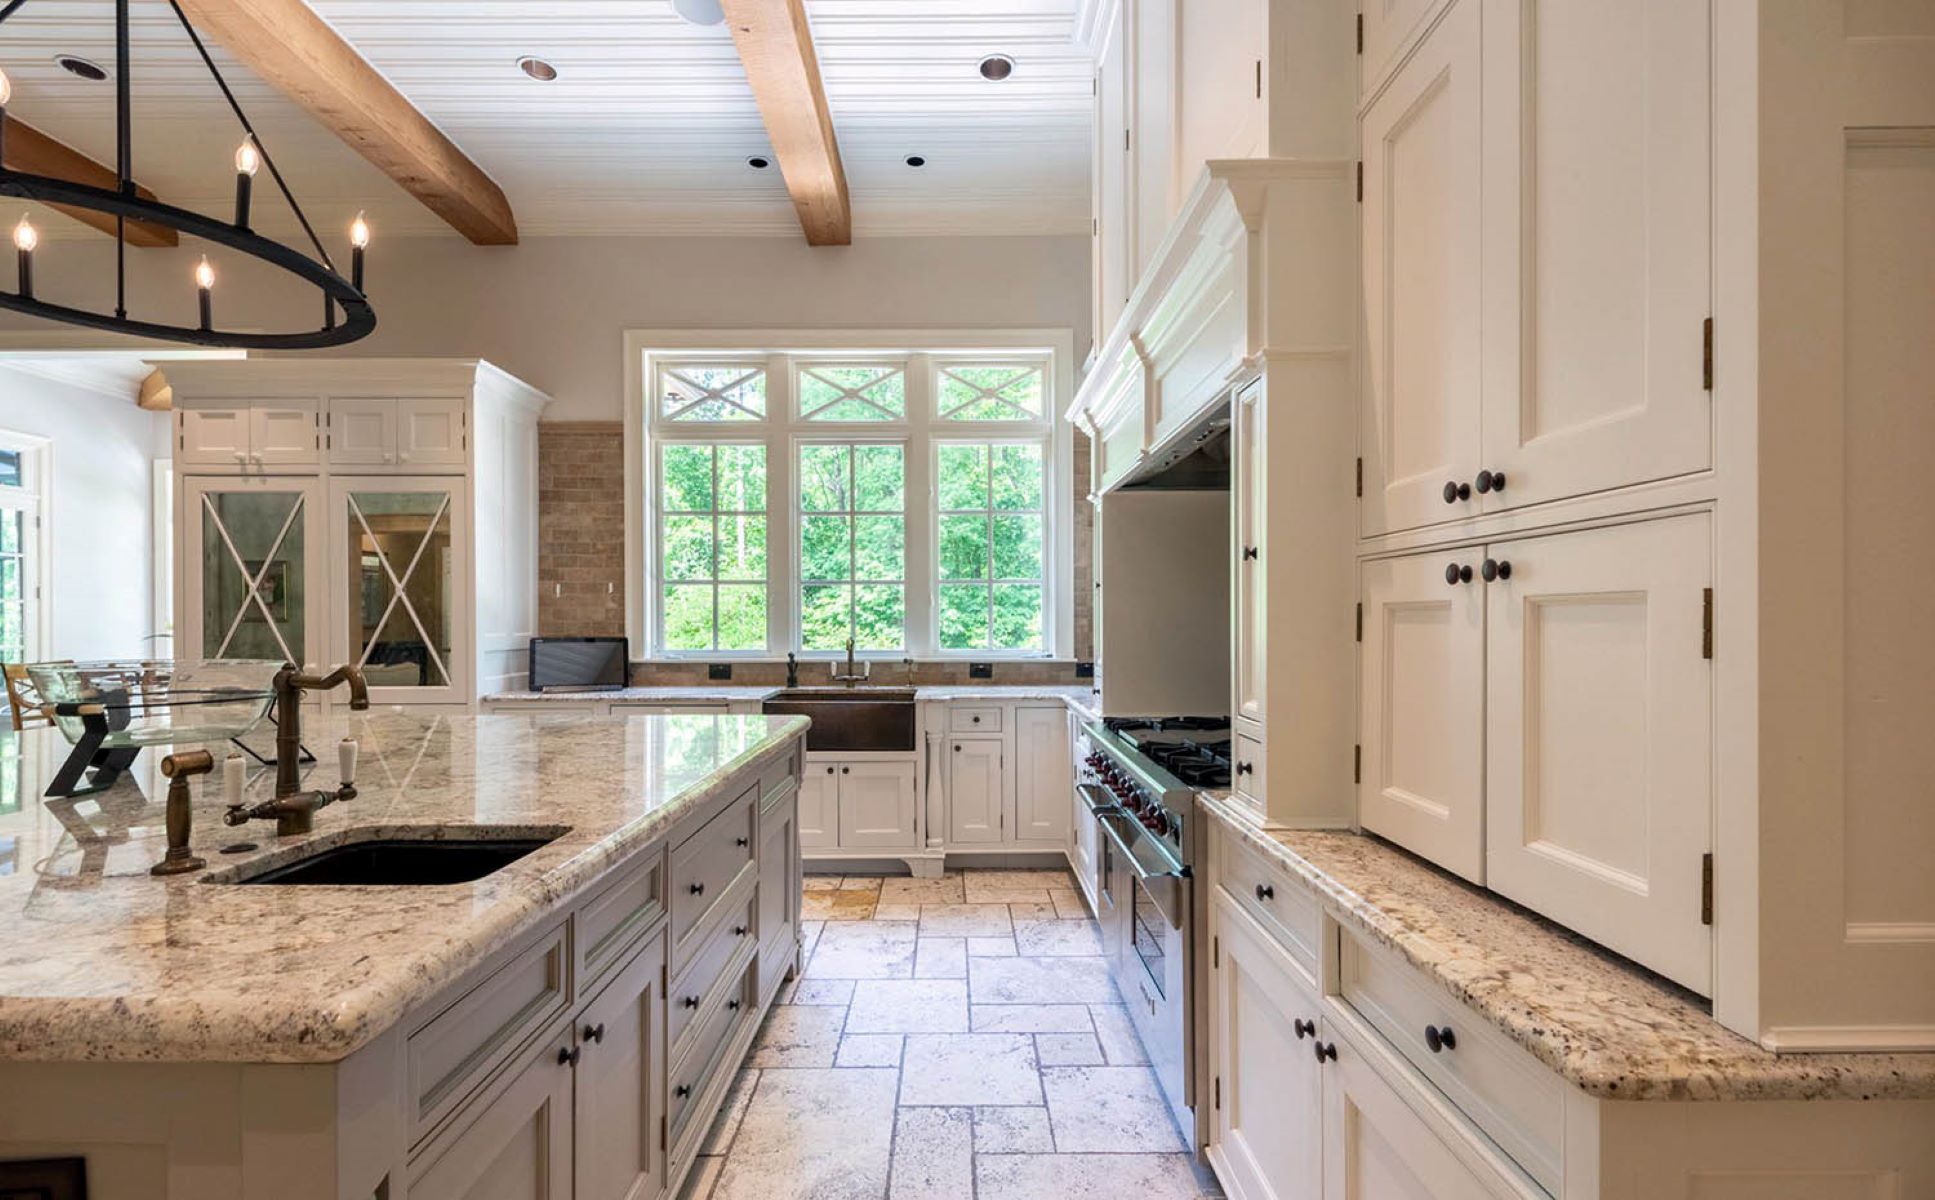 What Color Countertops Go With Cream Cabinets